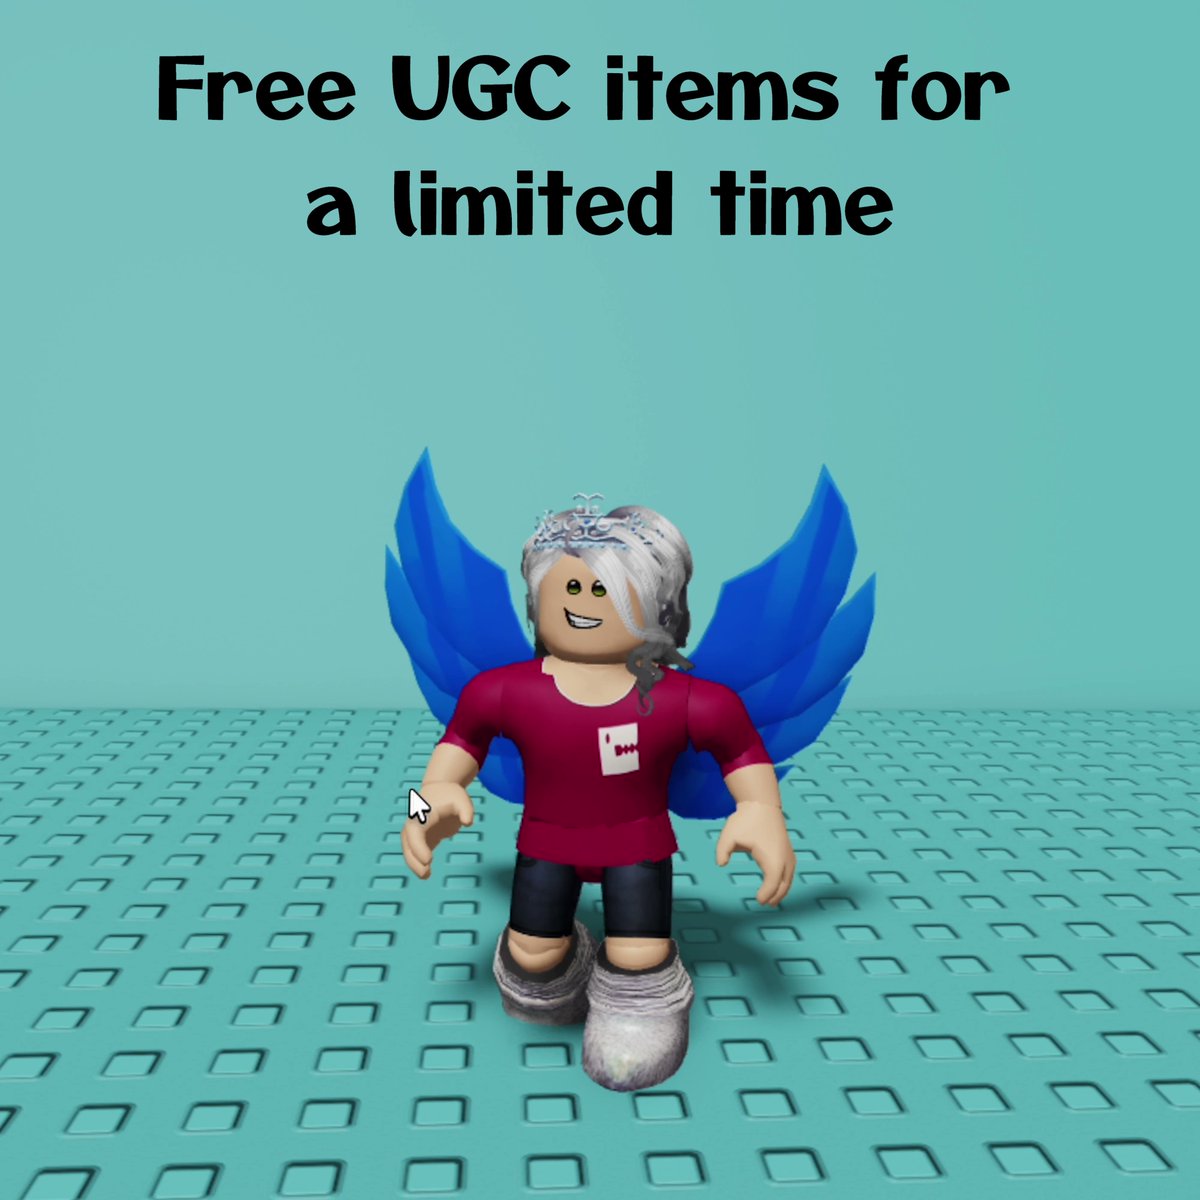 This game is Anime skin shop #roblox #robloxavatar #robloxmorph #rob